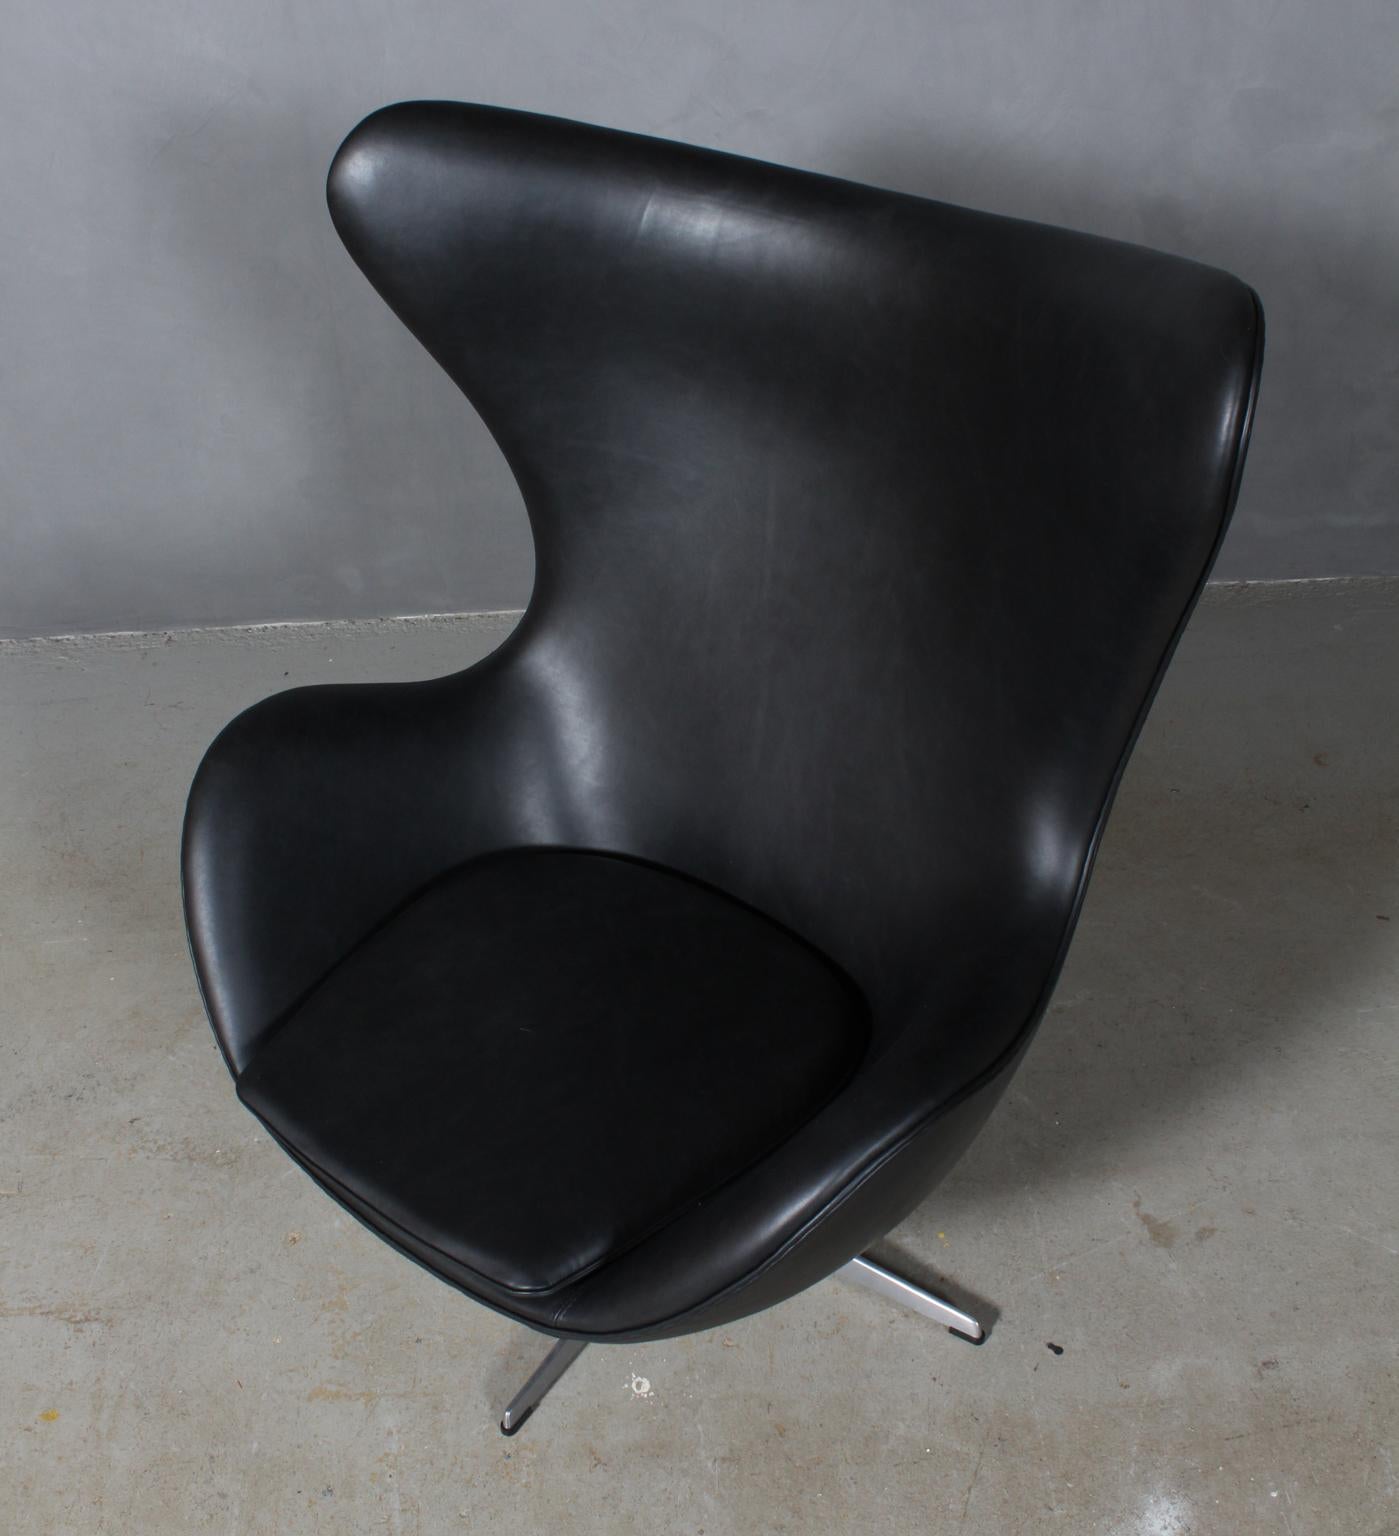 Arne Jacobsen set of lounge chairs model Egg. New upholstered with Dakar black aniline leather.

Four star base with tilt function.

Made by Fritz Hansen.

This iconic chair is one of the most famous chairs in the world and is recognized by